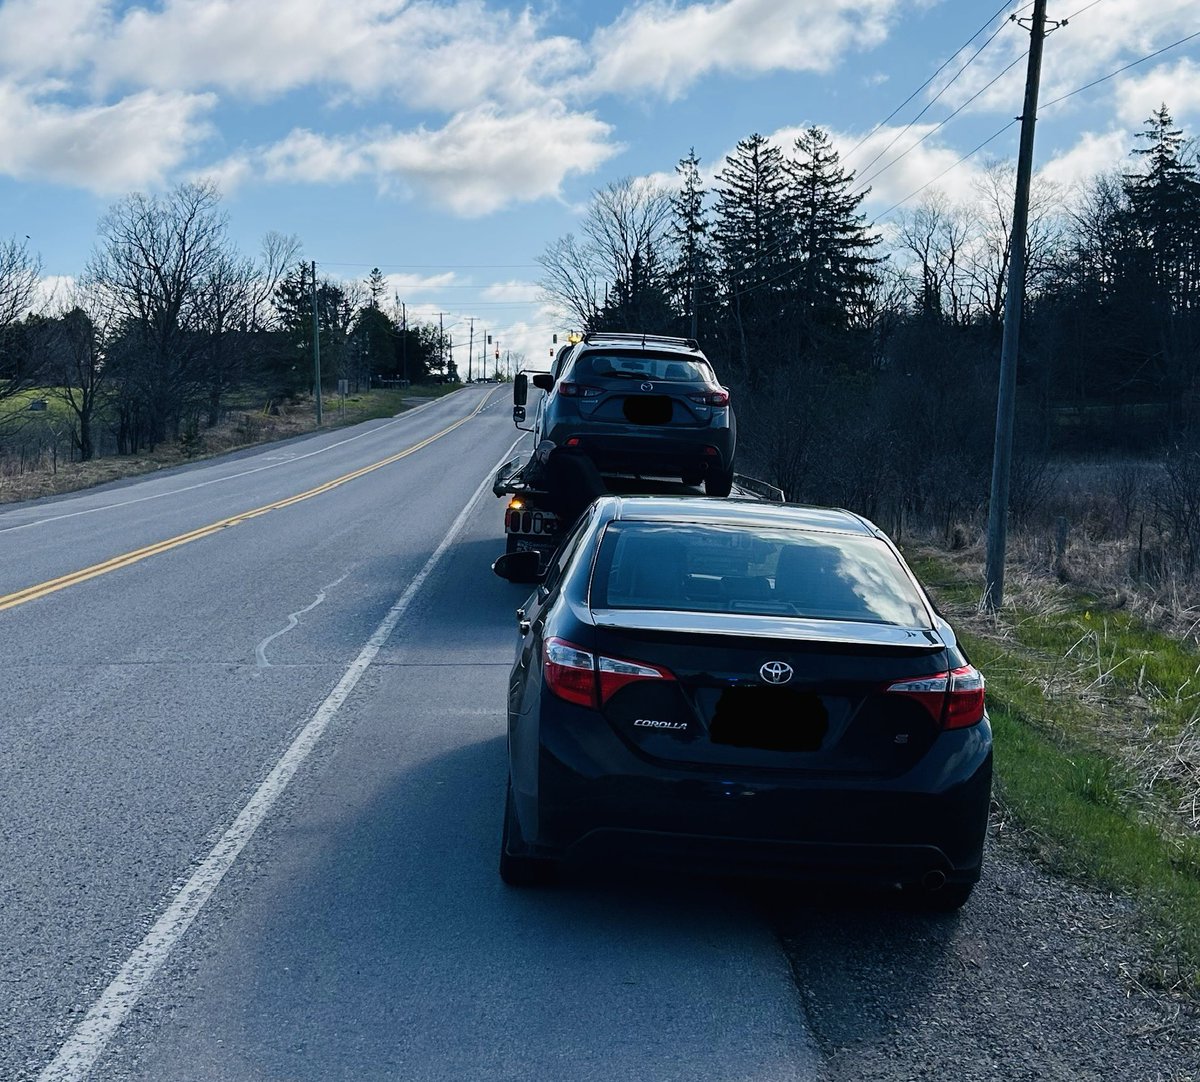 Two people charged for stunt so quickly that they made it on the same tow truck…Myrtle Rd/Highfield Dr Ashburn Village. Posted 50 km/h community safety zone. Slow down, drive safely and obey the rules of the road @DRPSCWDiv #TeamWork ^bb